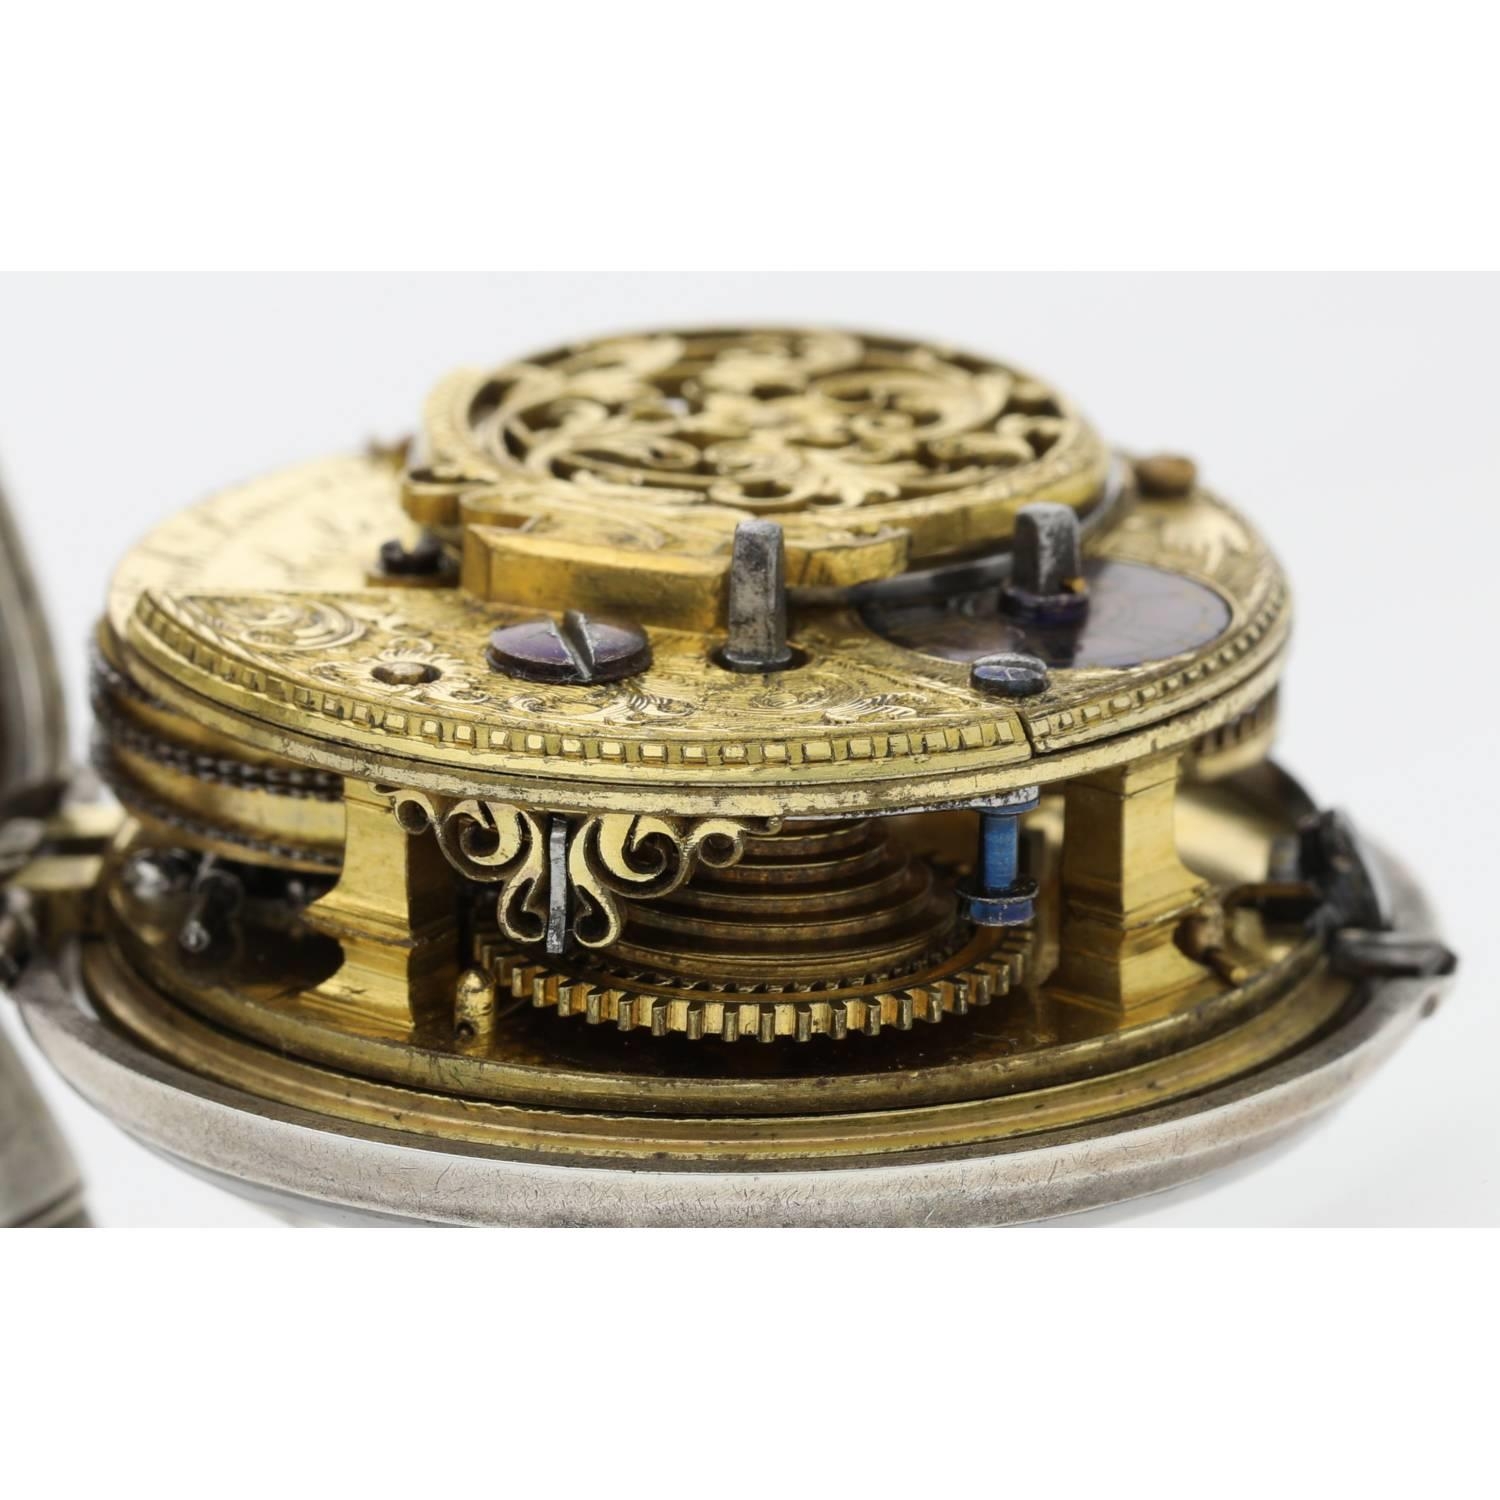 Archibald Lawrie, Carlisle - mid-18th century English silver pair cased verge pocket watch, signed - Image 5 of 10